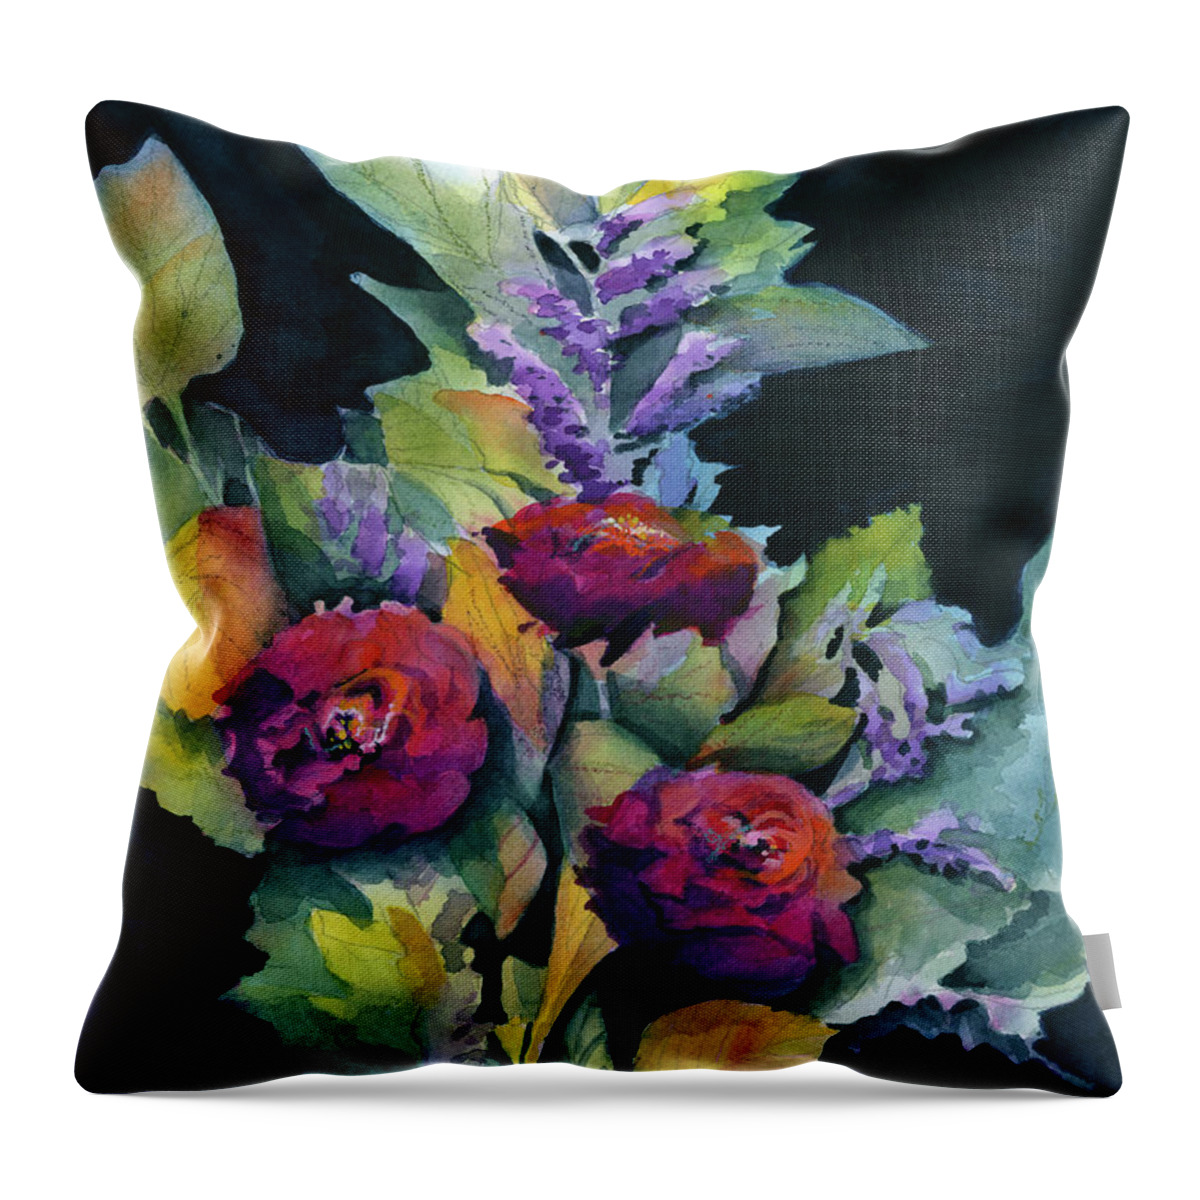 Floral Throw Pillow featuring the painting Glorious by Lois Blasberg